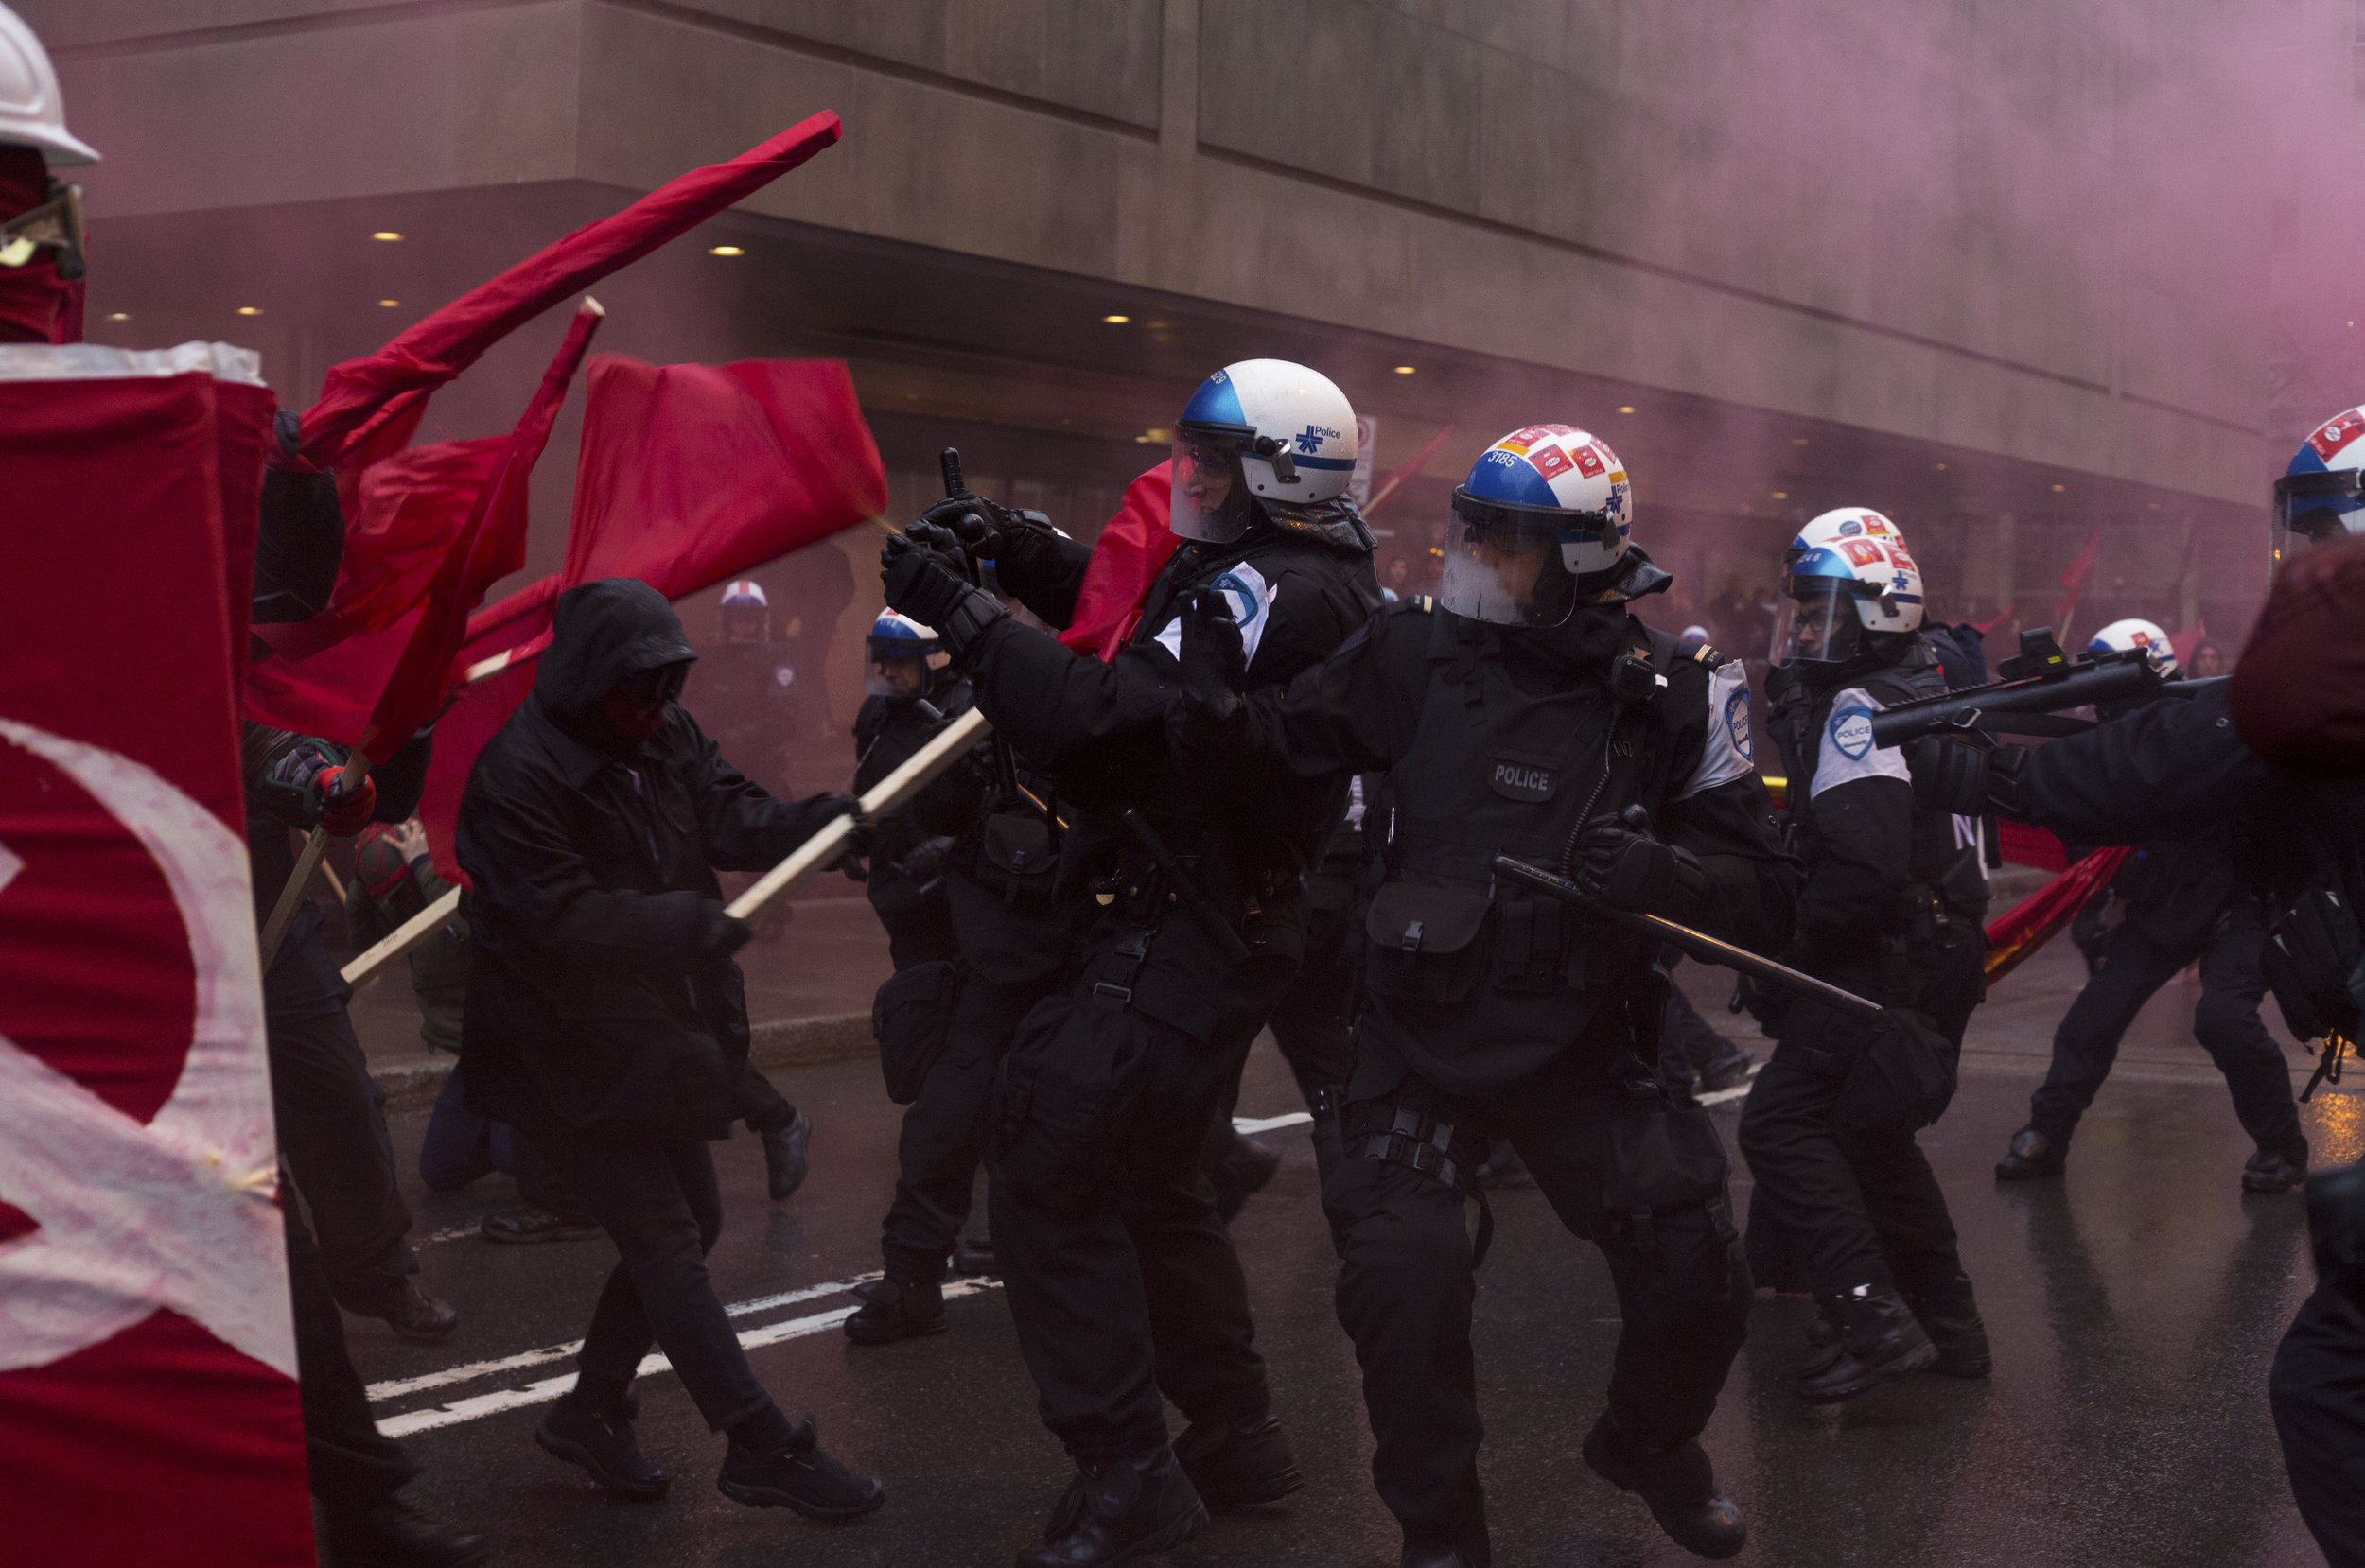  Protesters clash with riot police at an anticapitalist May Day demonstration in Montreal (May 1 2017) 